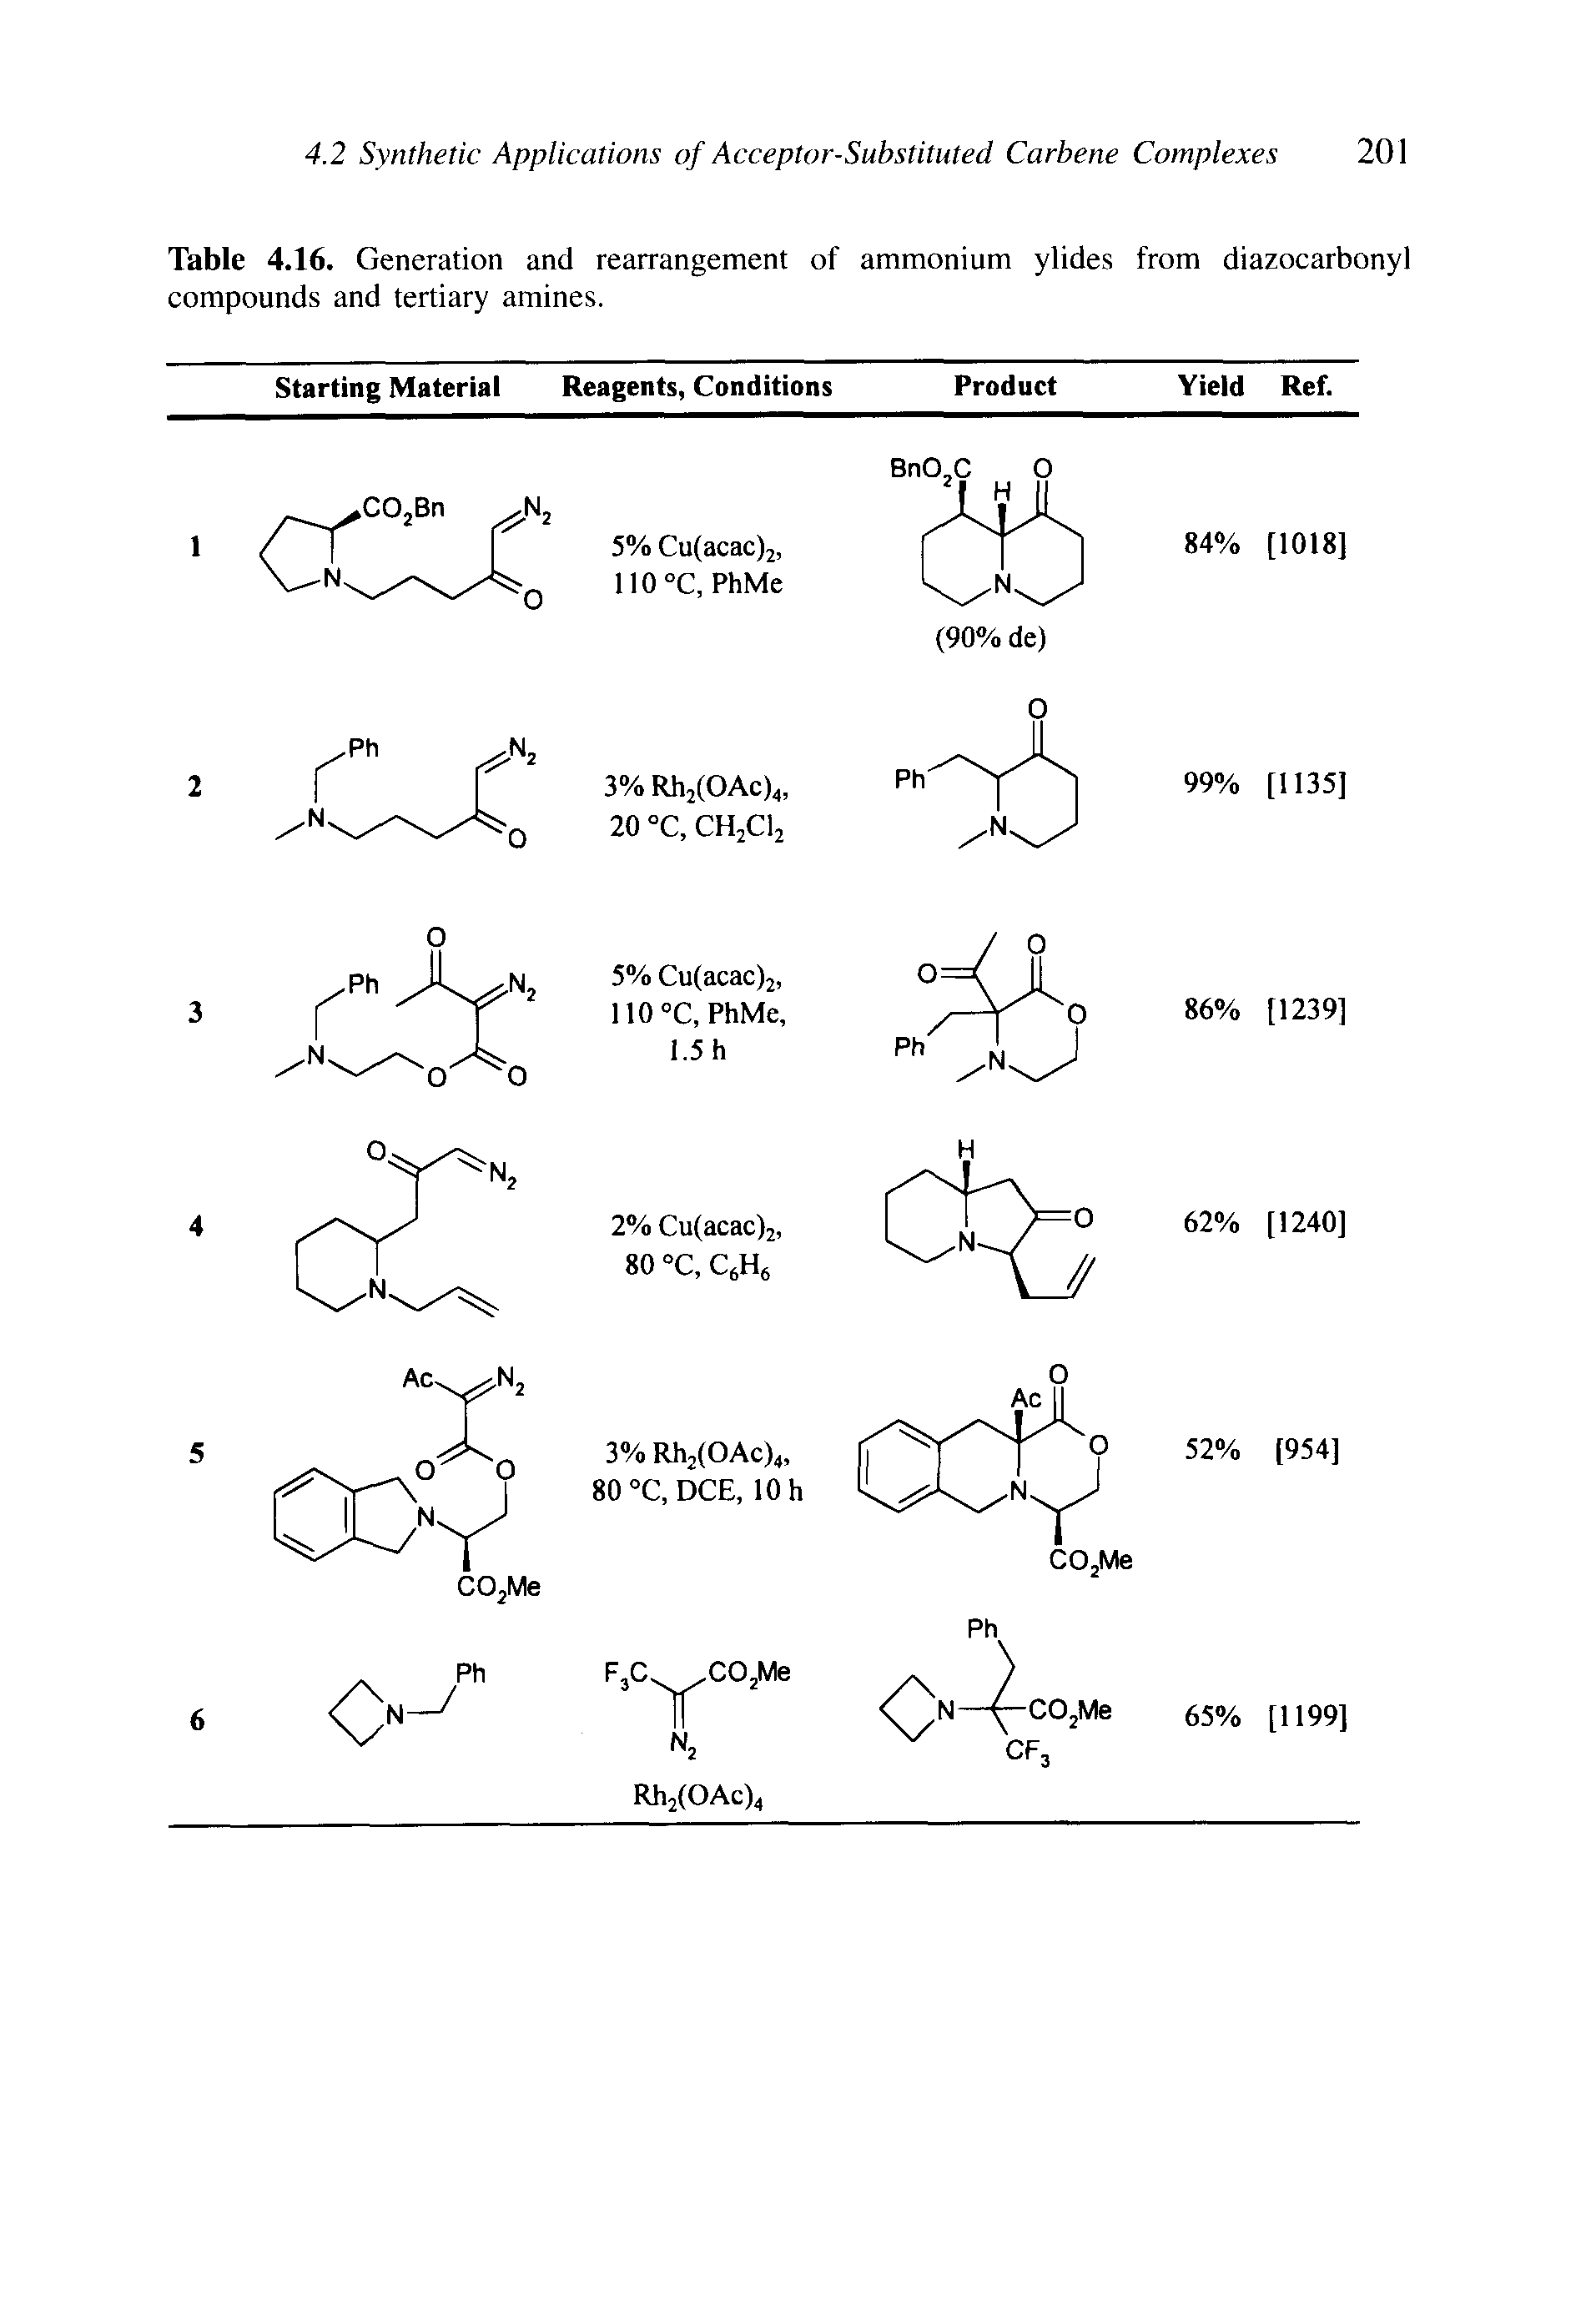 Table 4.16. Generation and rearrangement of ammonium ylides from diazocarbonyl compounds and tertiary amines.